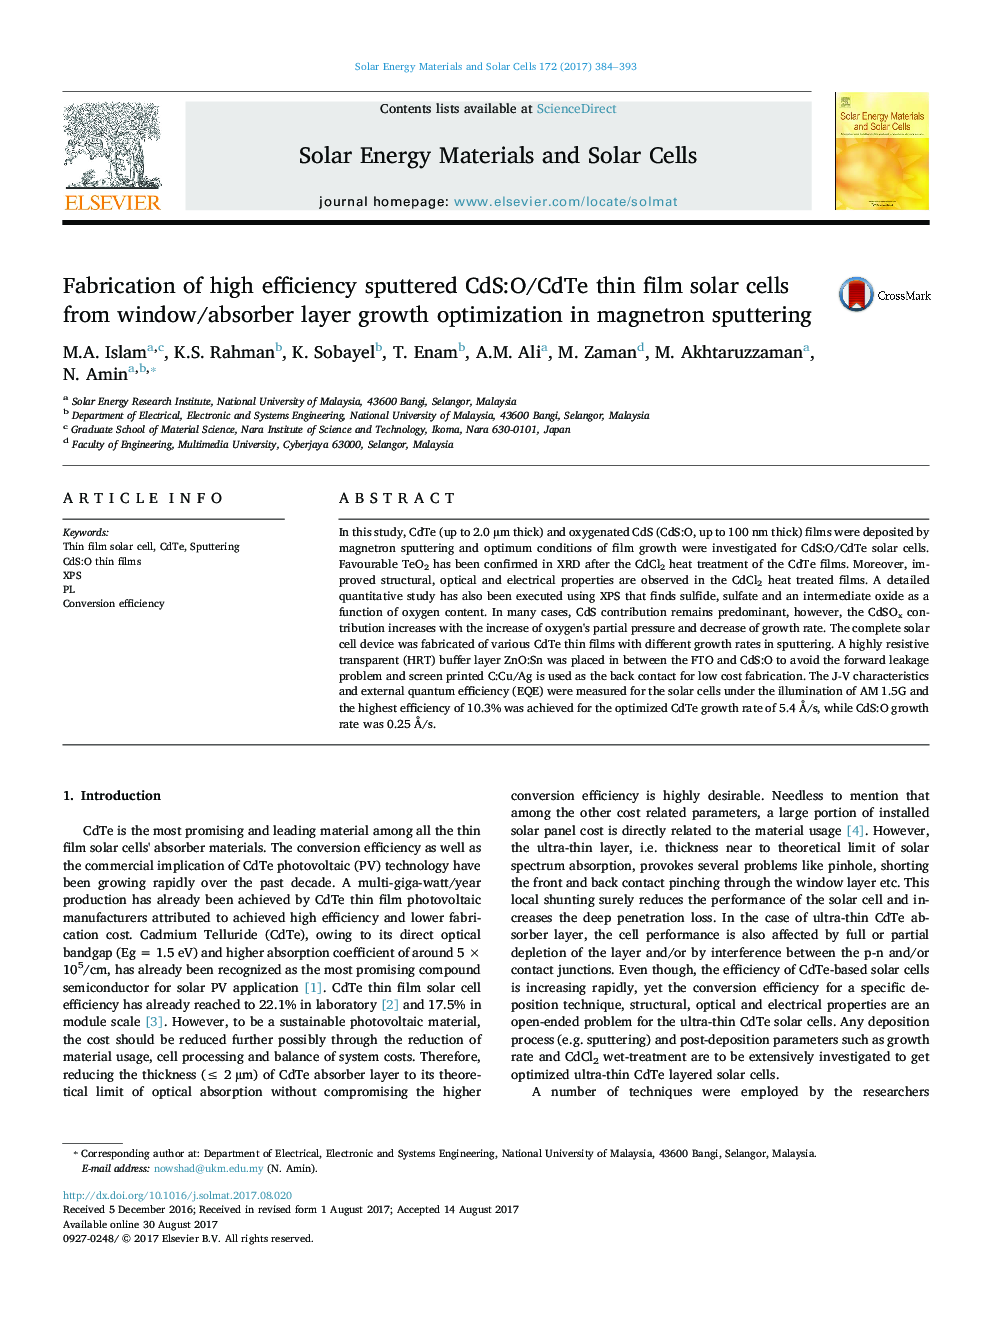 Fabrication of high efficiency sputtered CdS:O/CdTe thin film solar cells from window/absorber layer growth optimization in magnetron sputtering